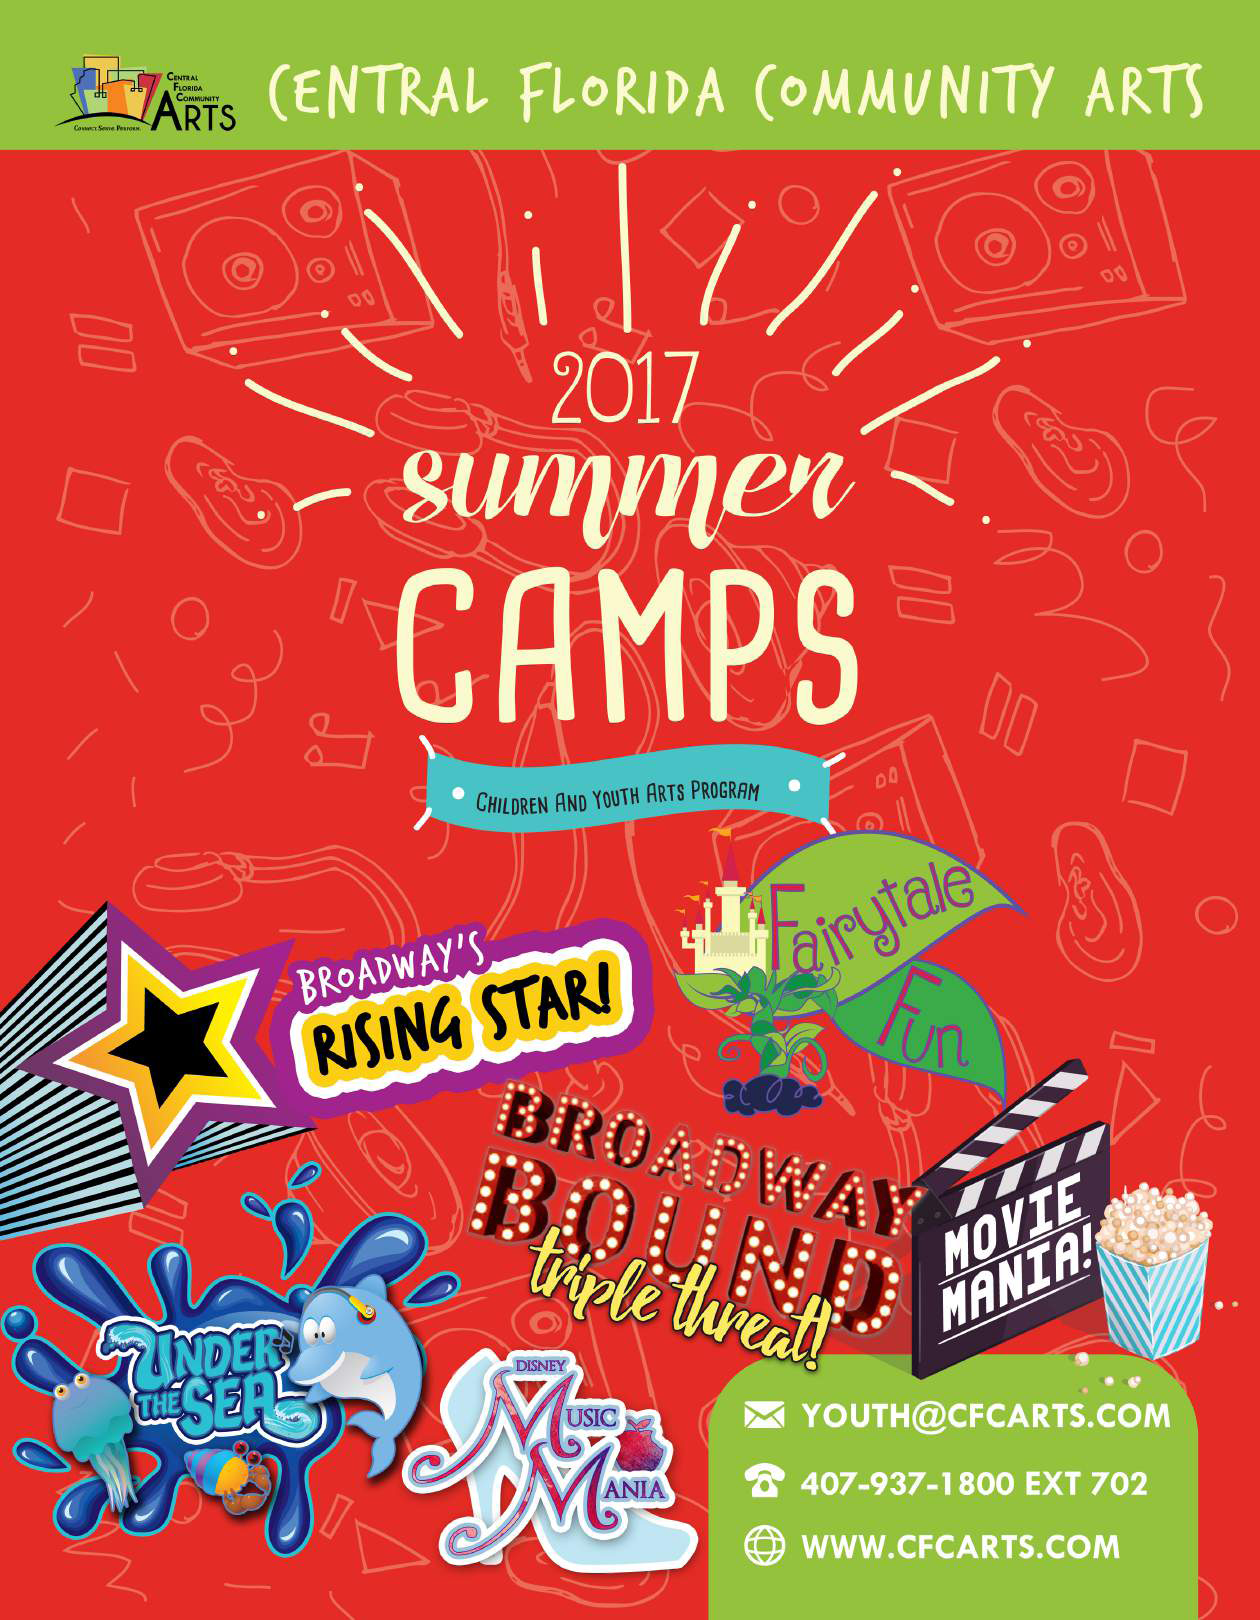 CFC Summer Camps offer scholarships